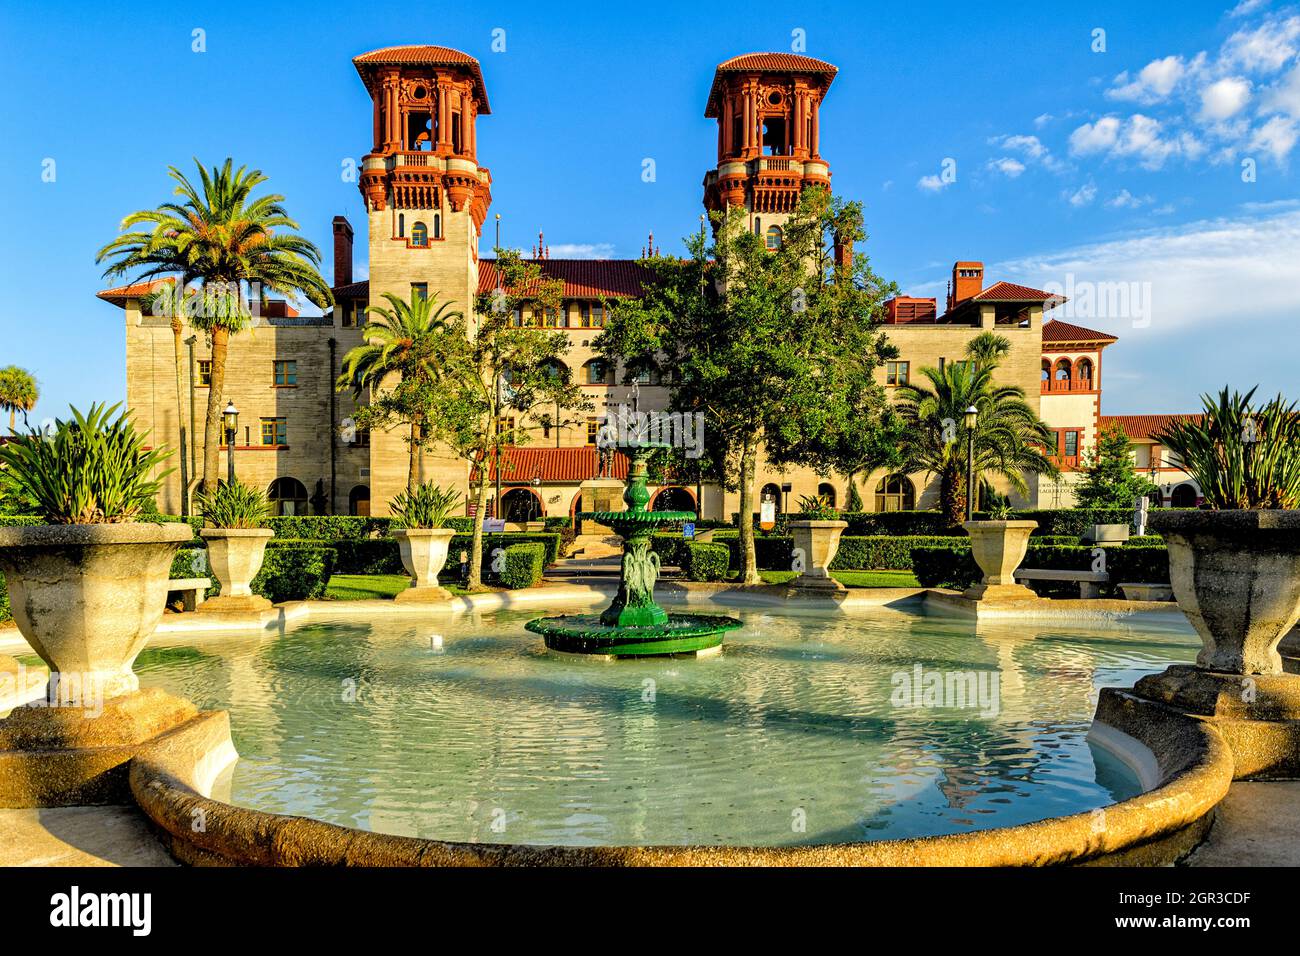 The Lightner Museum, formerly known as the Alcazar Hotel, built by Henry Flagler in St Augustine Florida Stock Photo